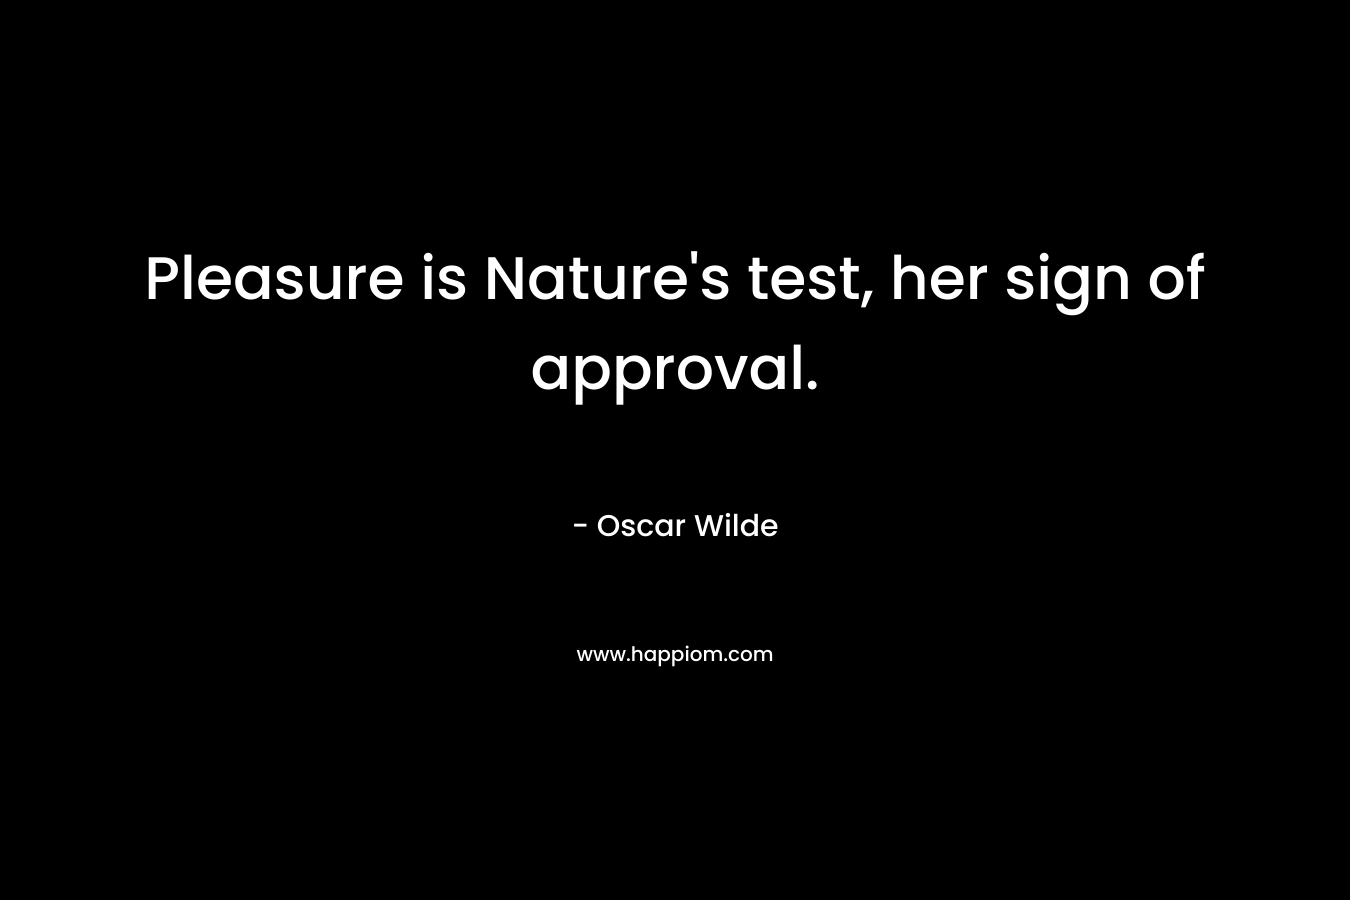 Pleasure is Nature’s test, her sign of approval. – Oscar Wilde